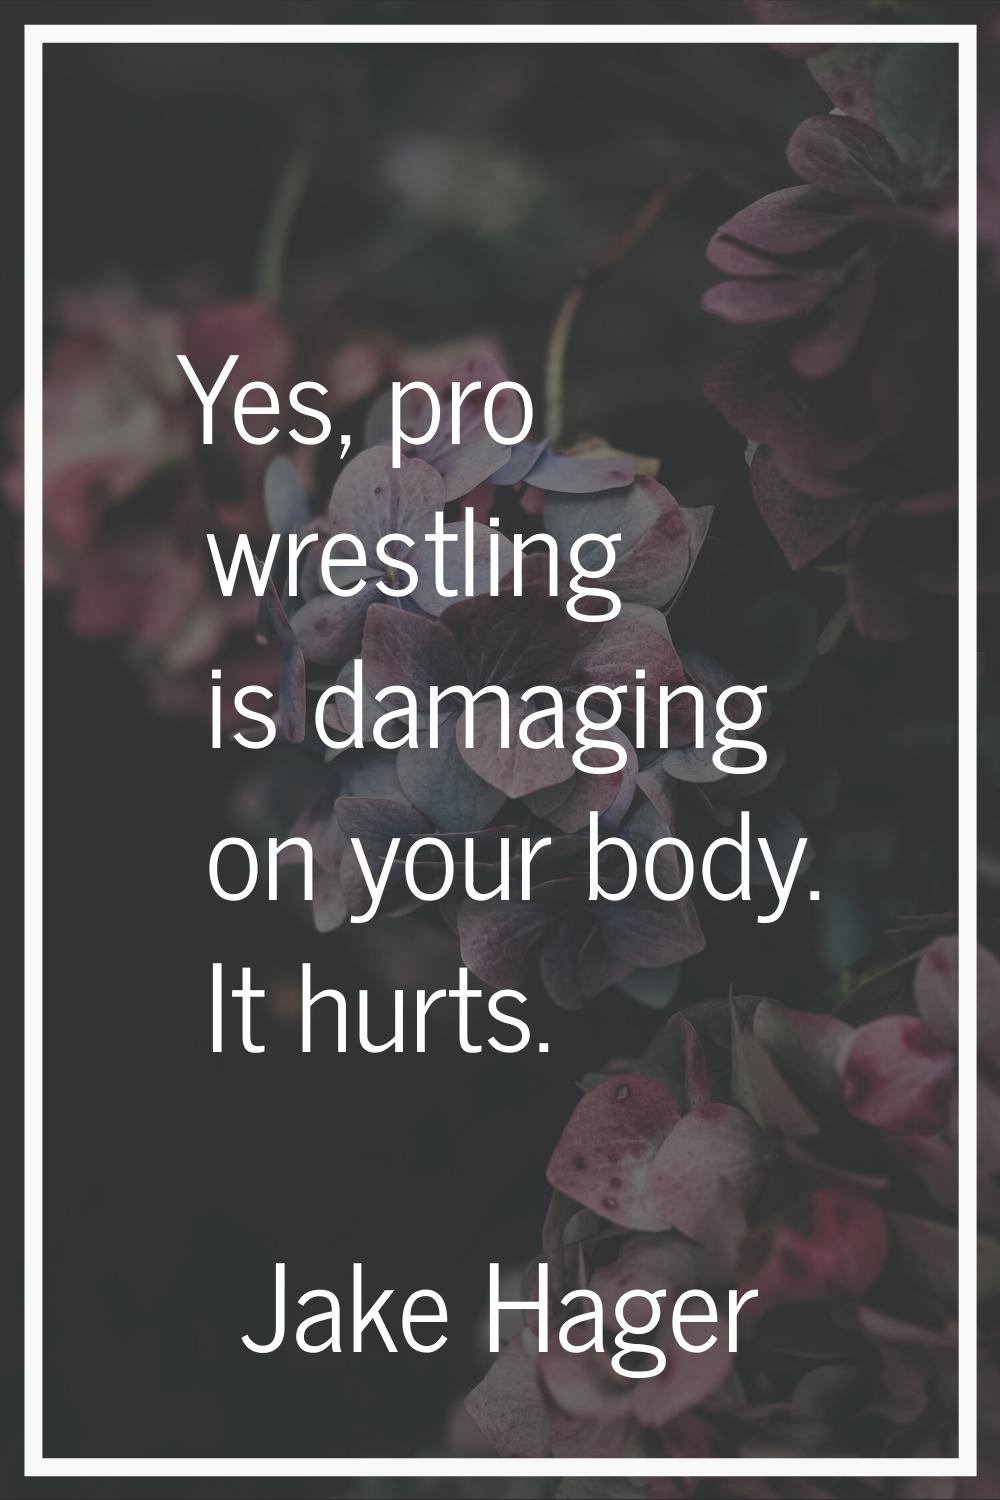 Yes, pro wrestling is damaging on your body. It hurts.